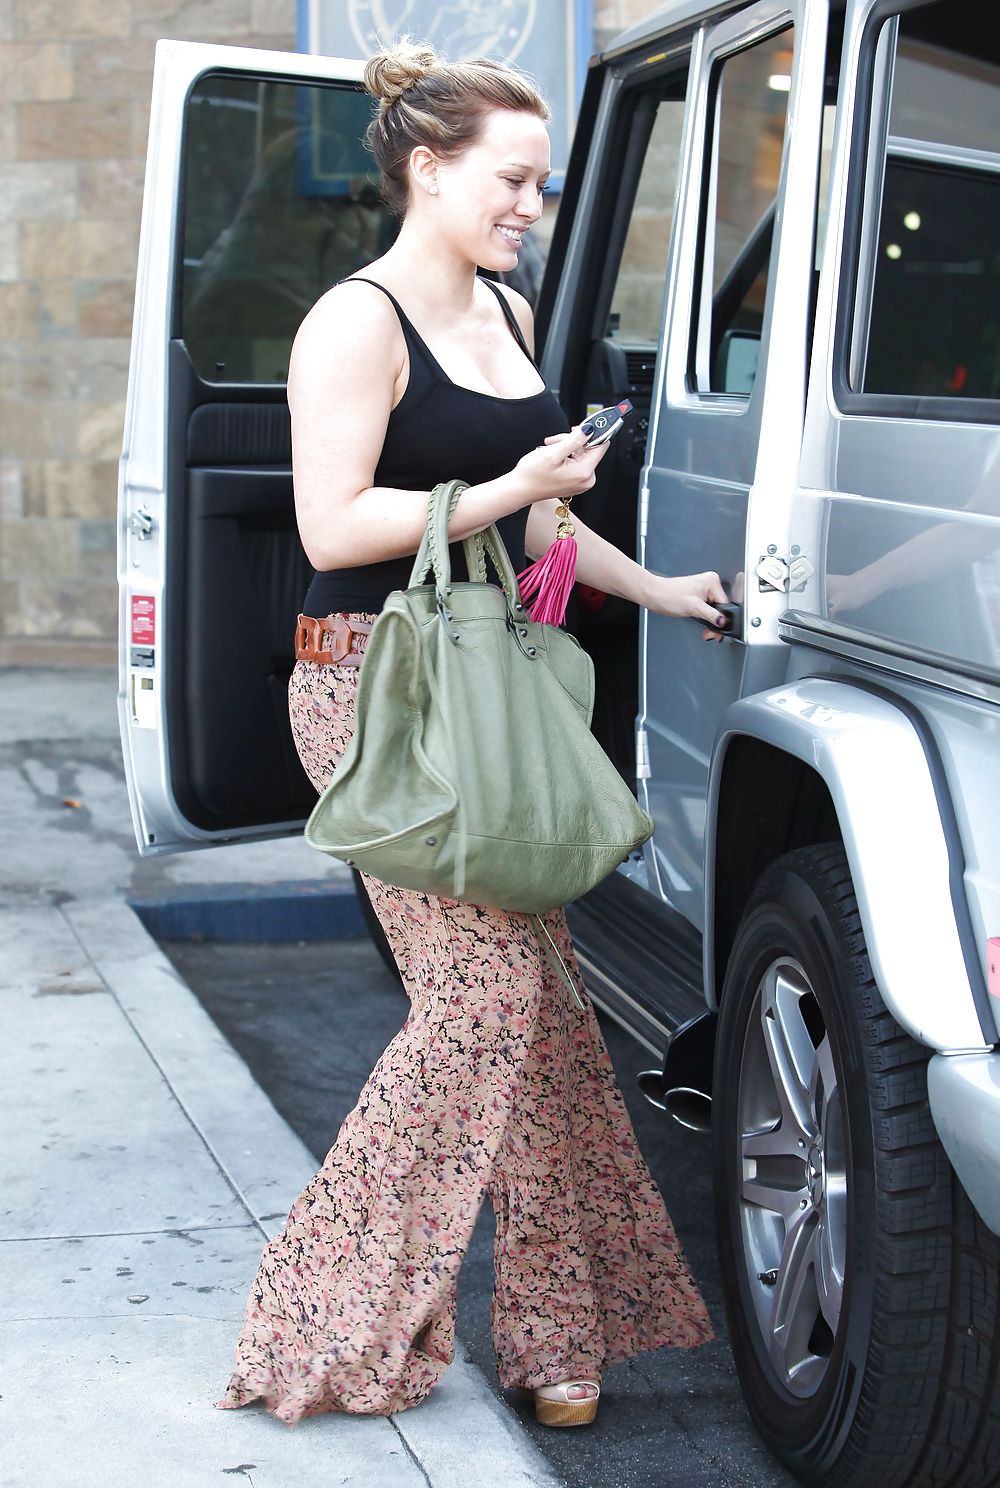 Hilary Duff Slight Cleavage and Pokies O and A in Hollywood #5546489